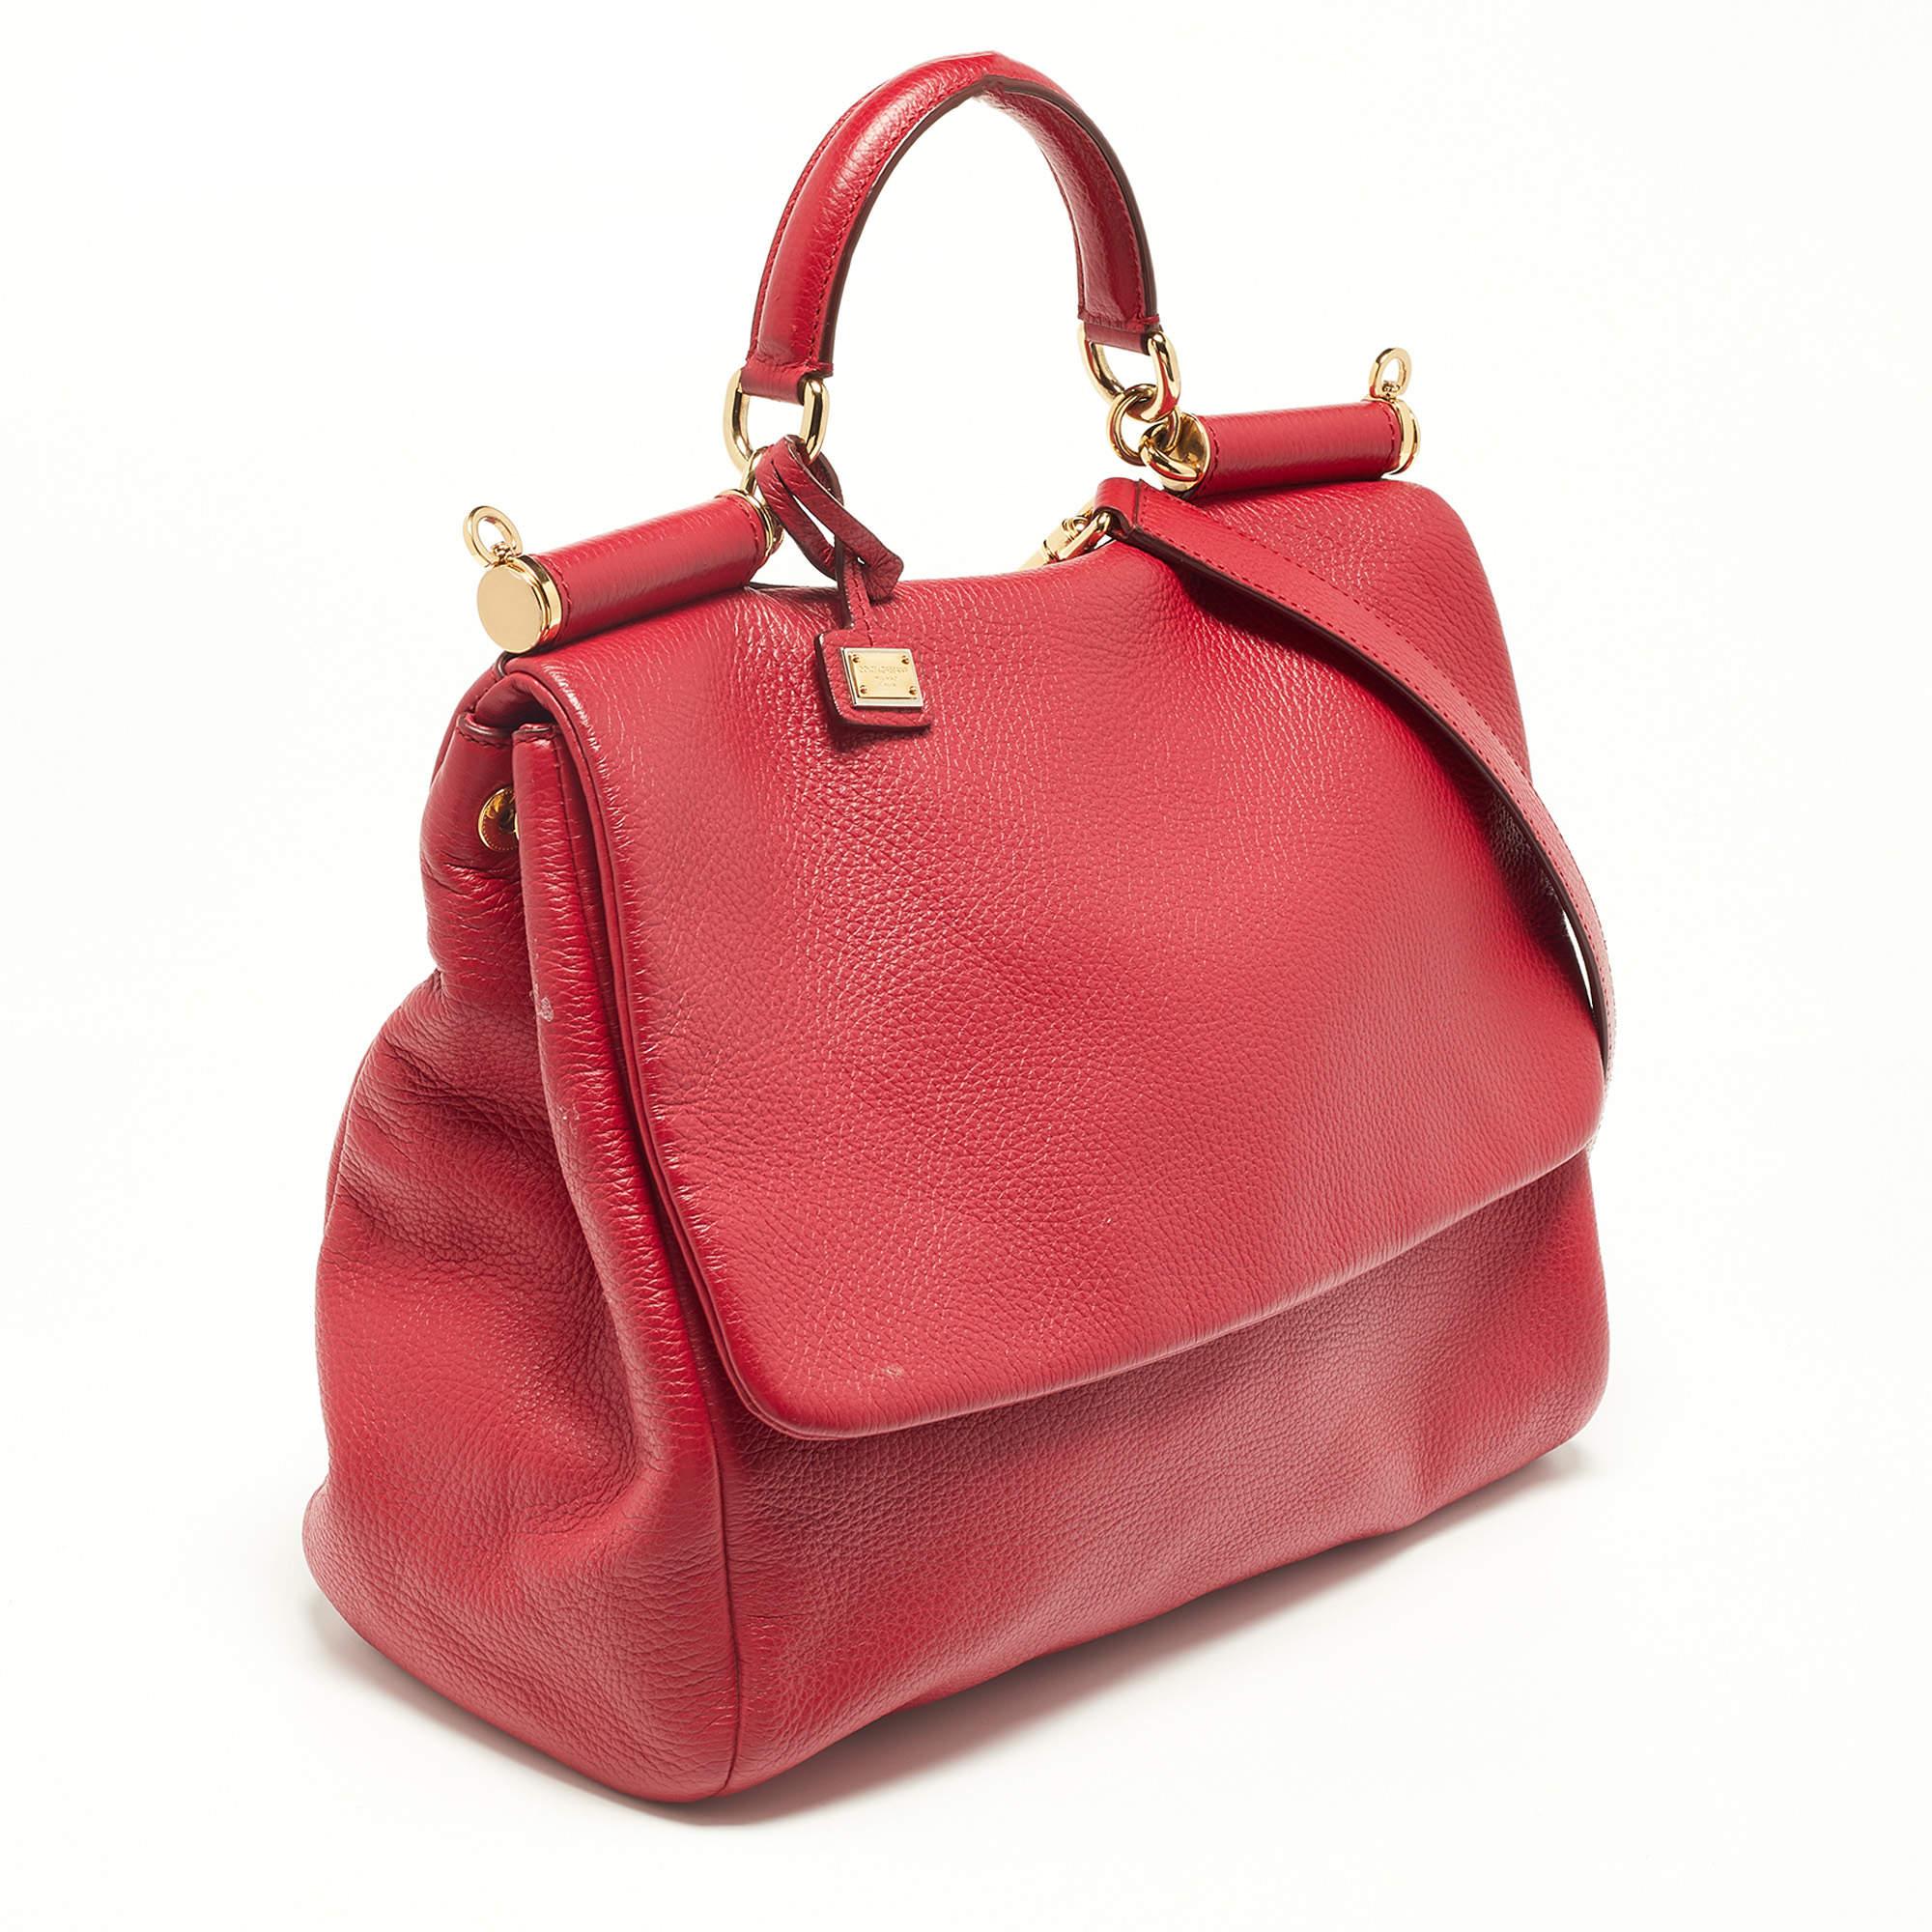 Women's Dolce & Gabbana Red Leather Miss Sicily Top Handle Bag